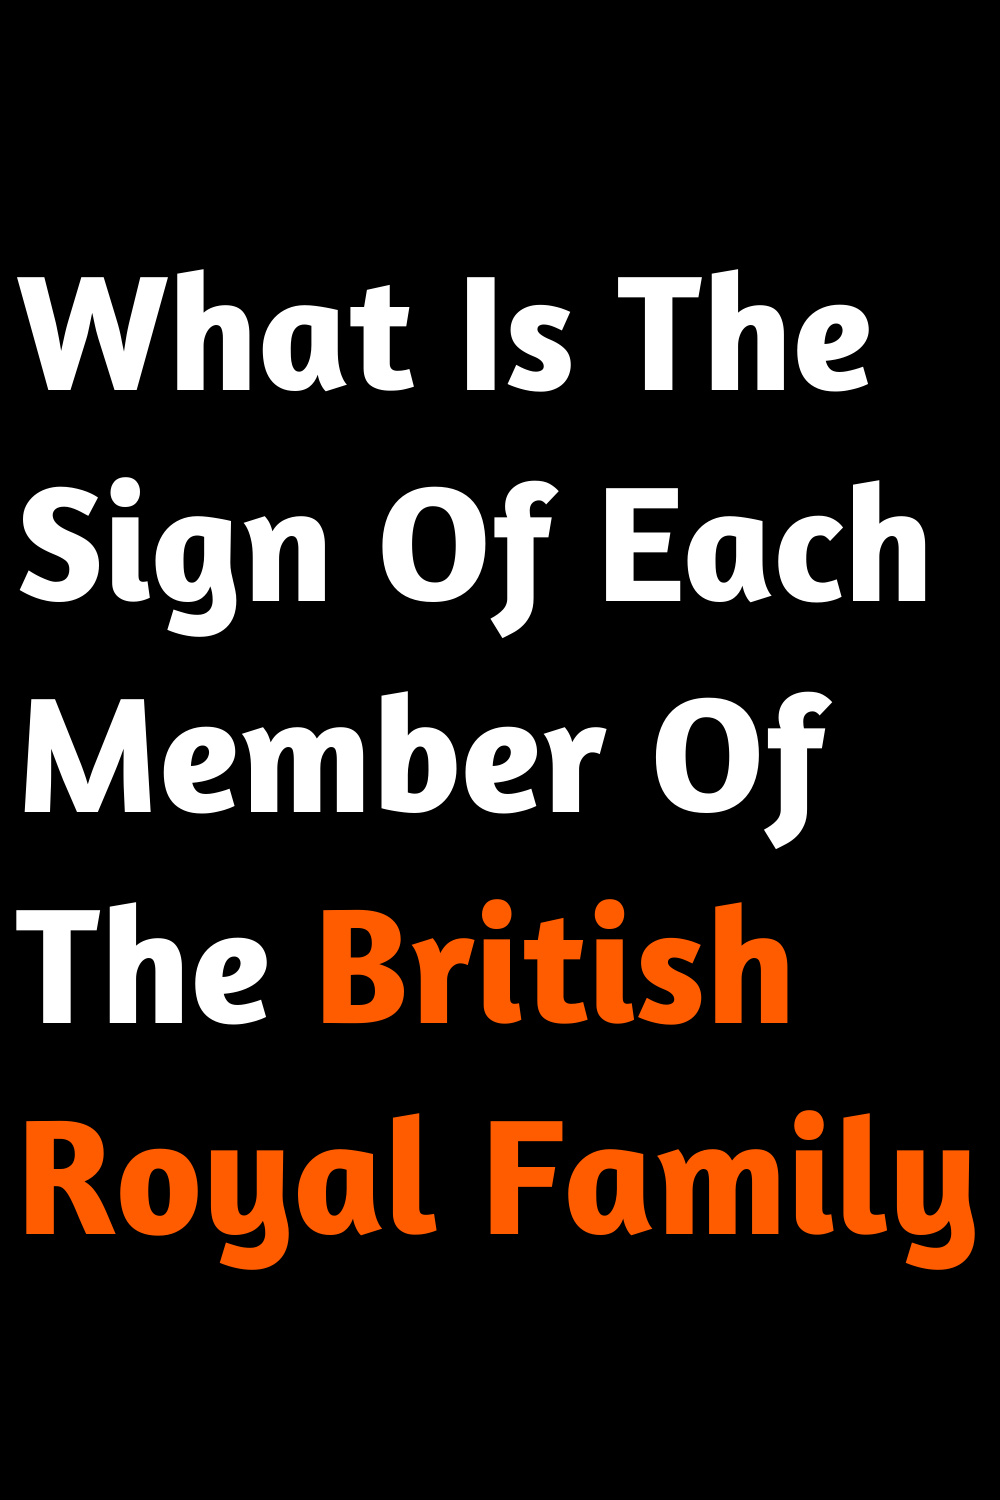 What Is The Sign Of Each Member Of The British Royal Family